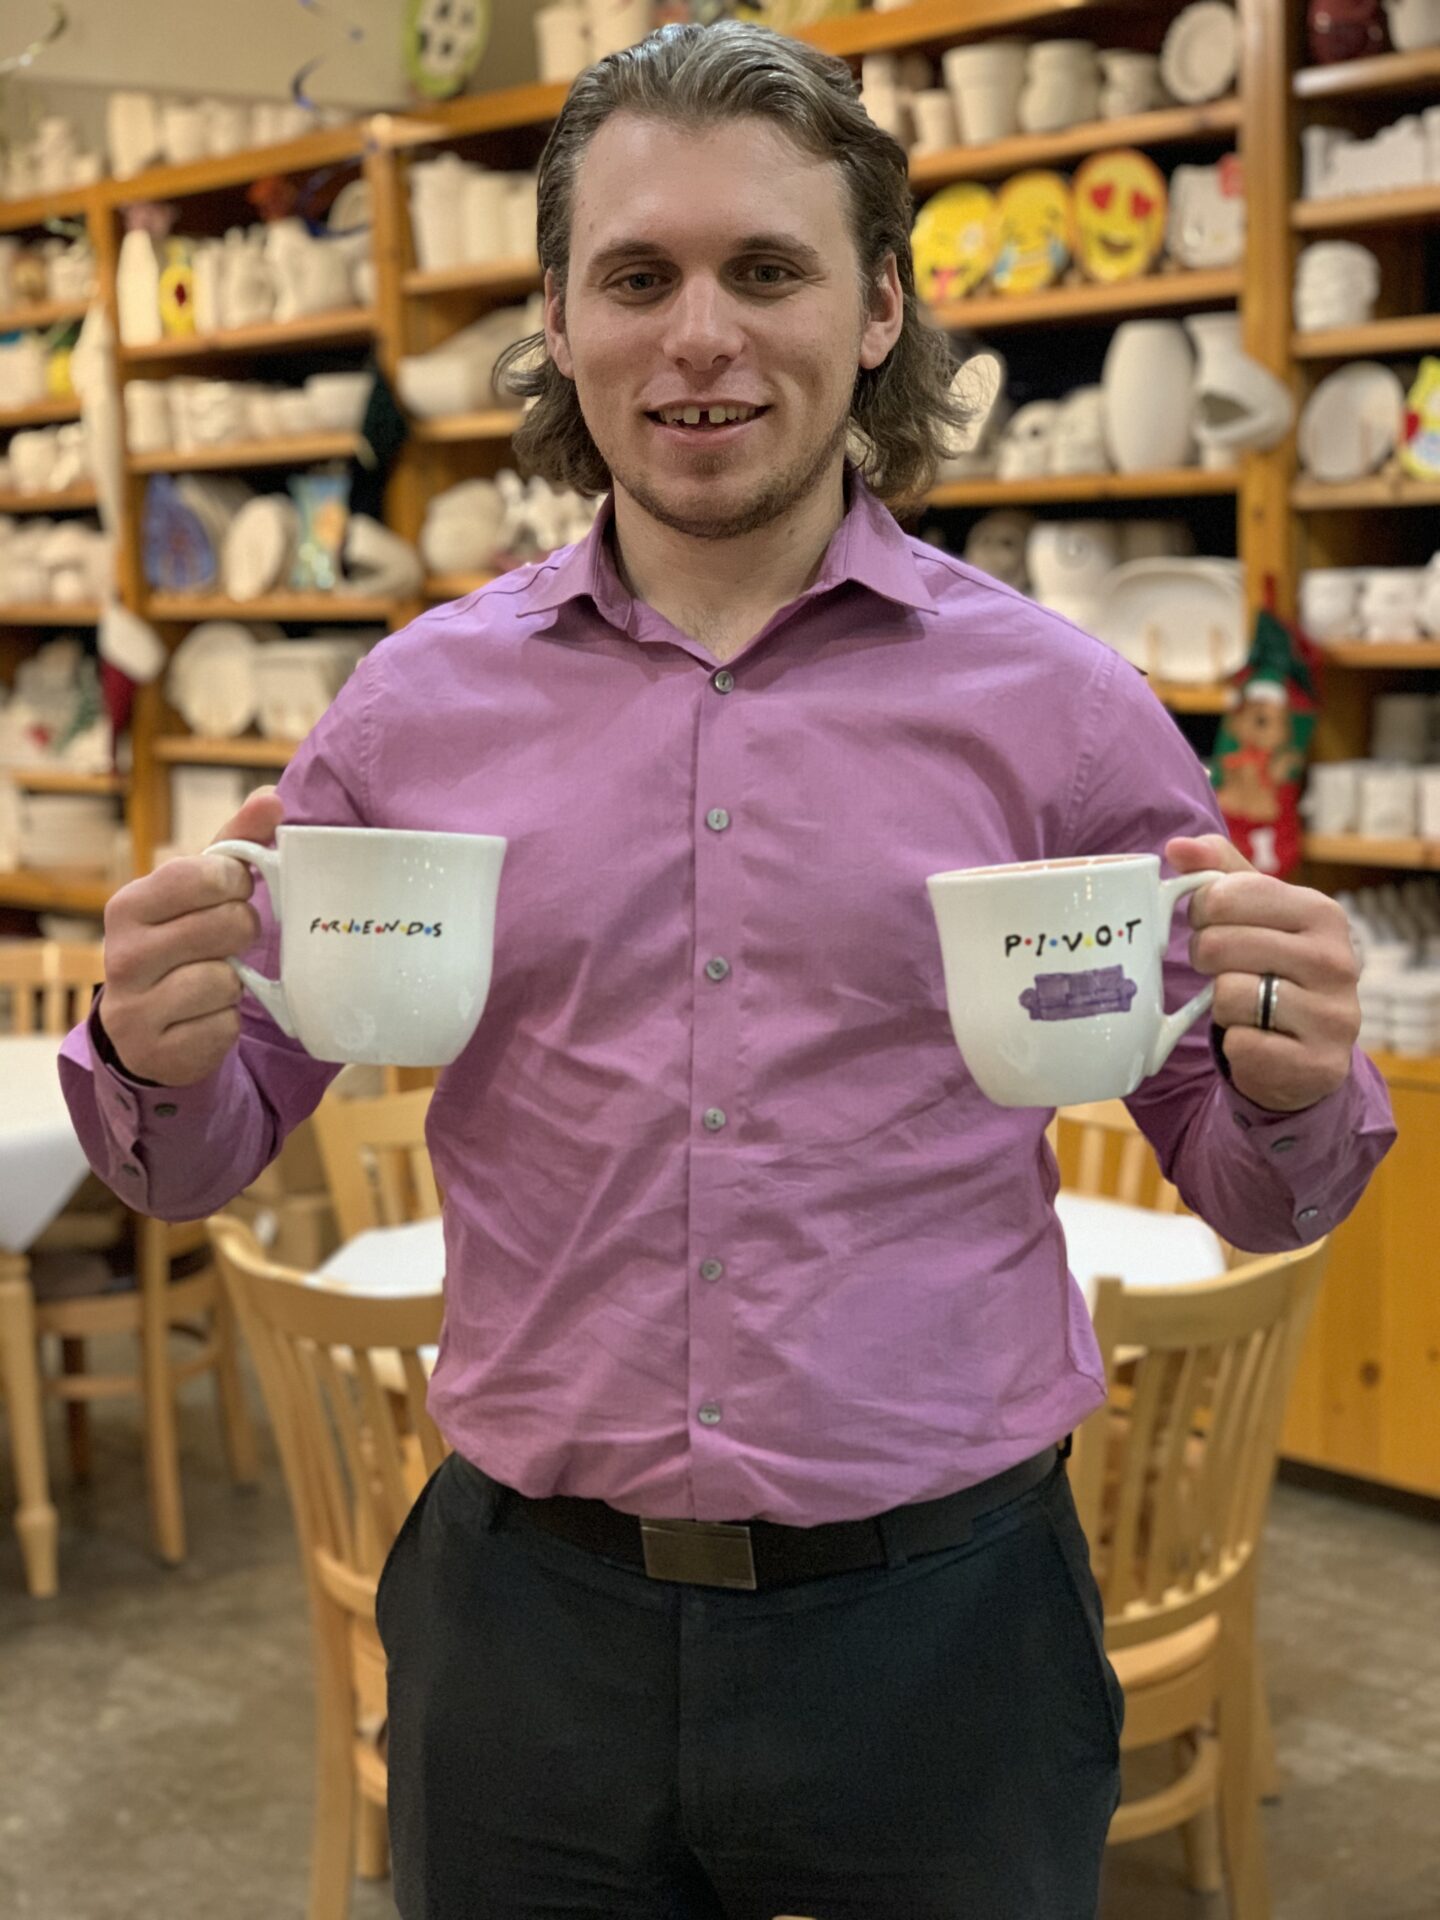 Person holding cups of coffee and smiling for the camera